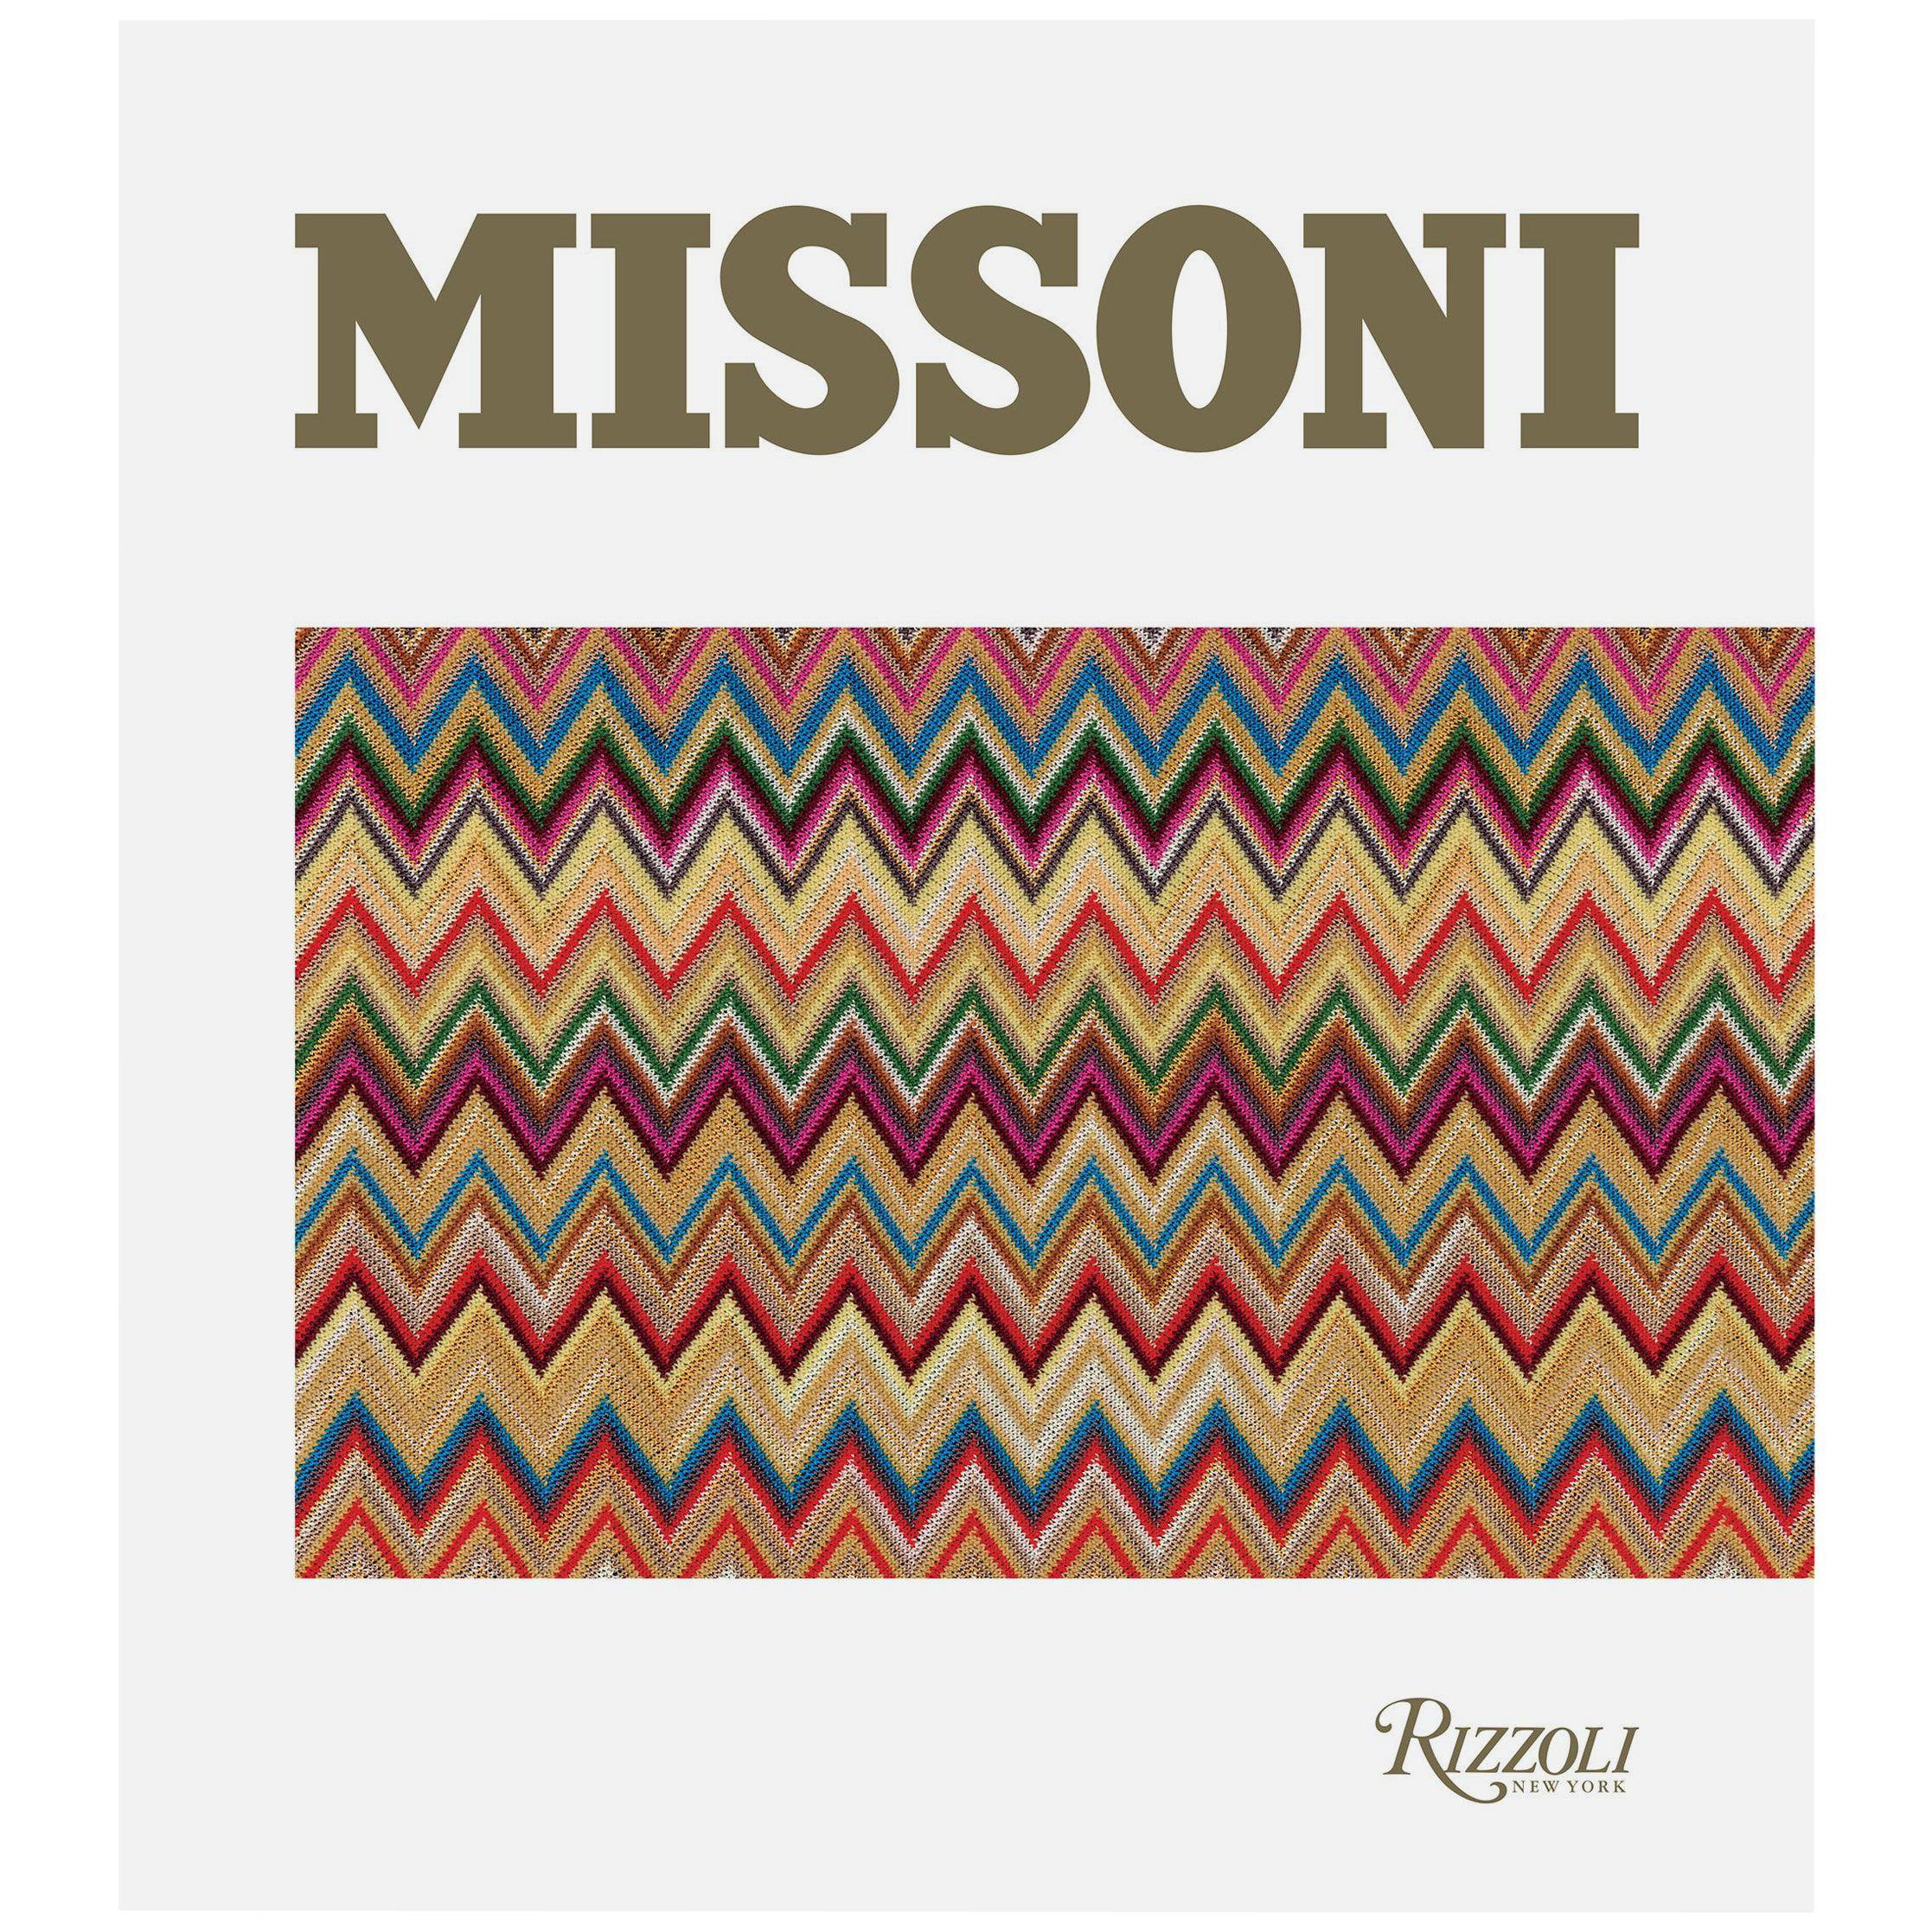 Missoni Deluxe Edition For Sale